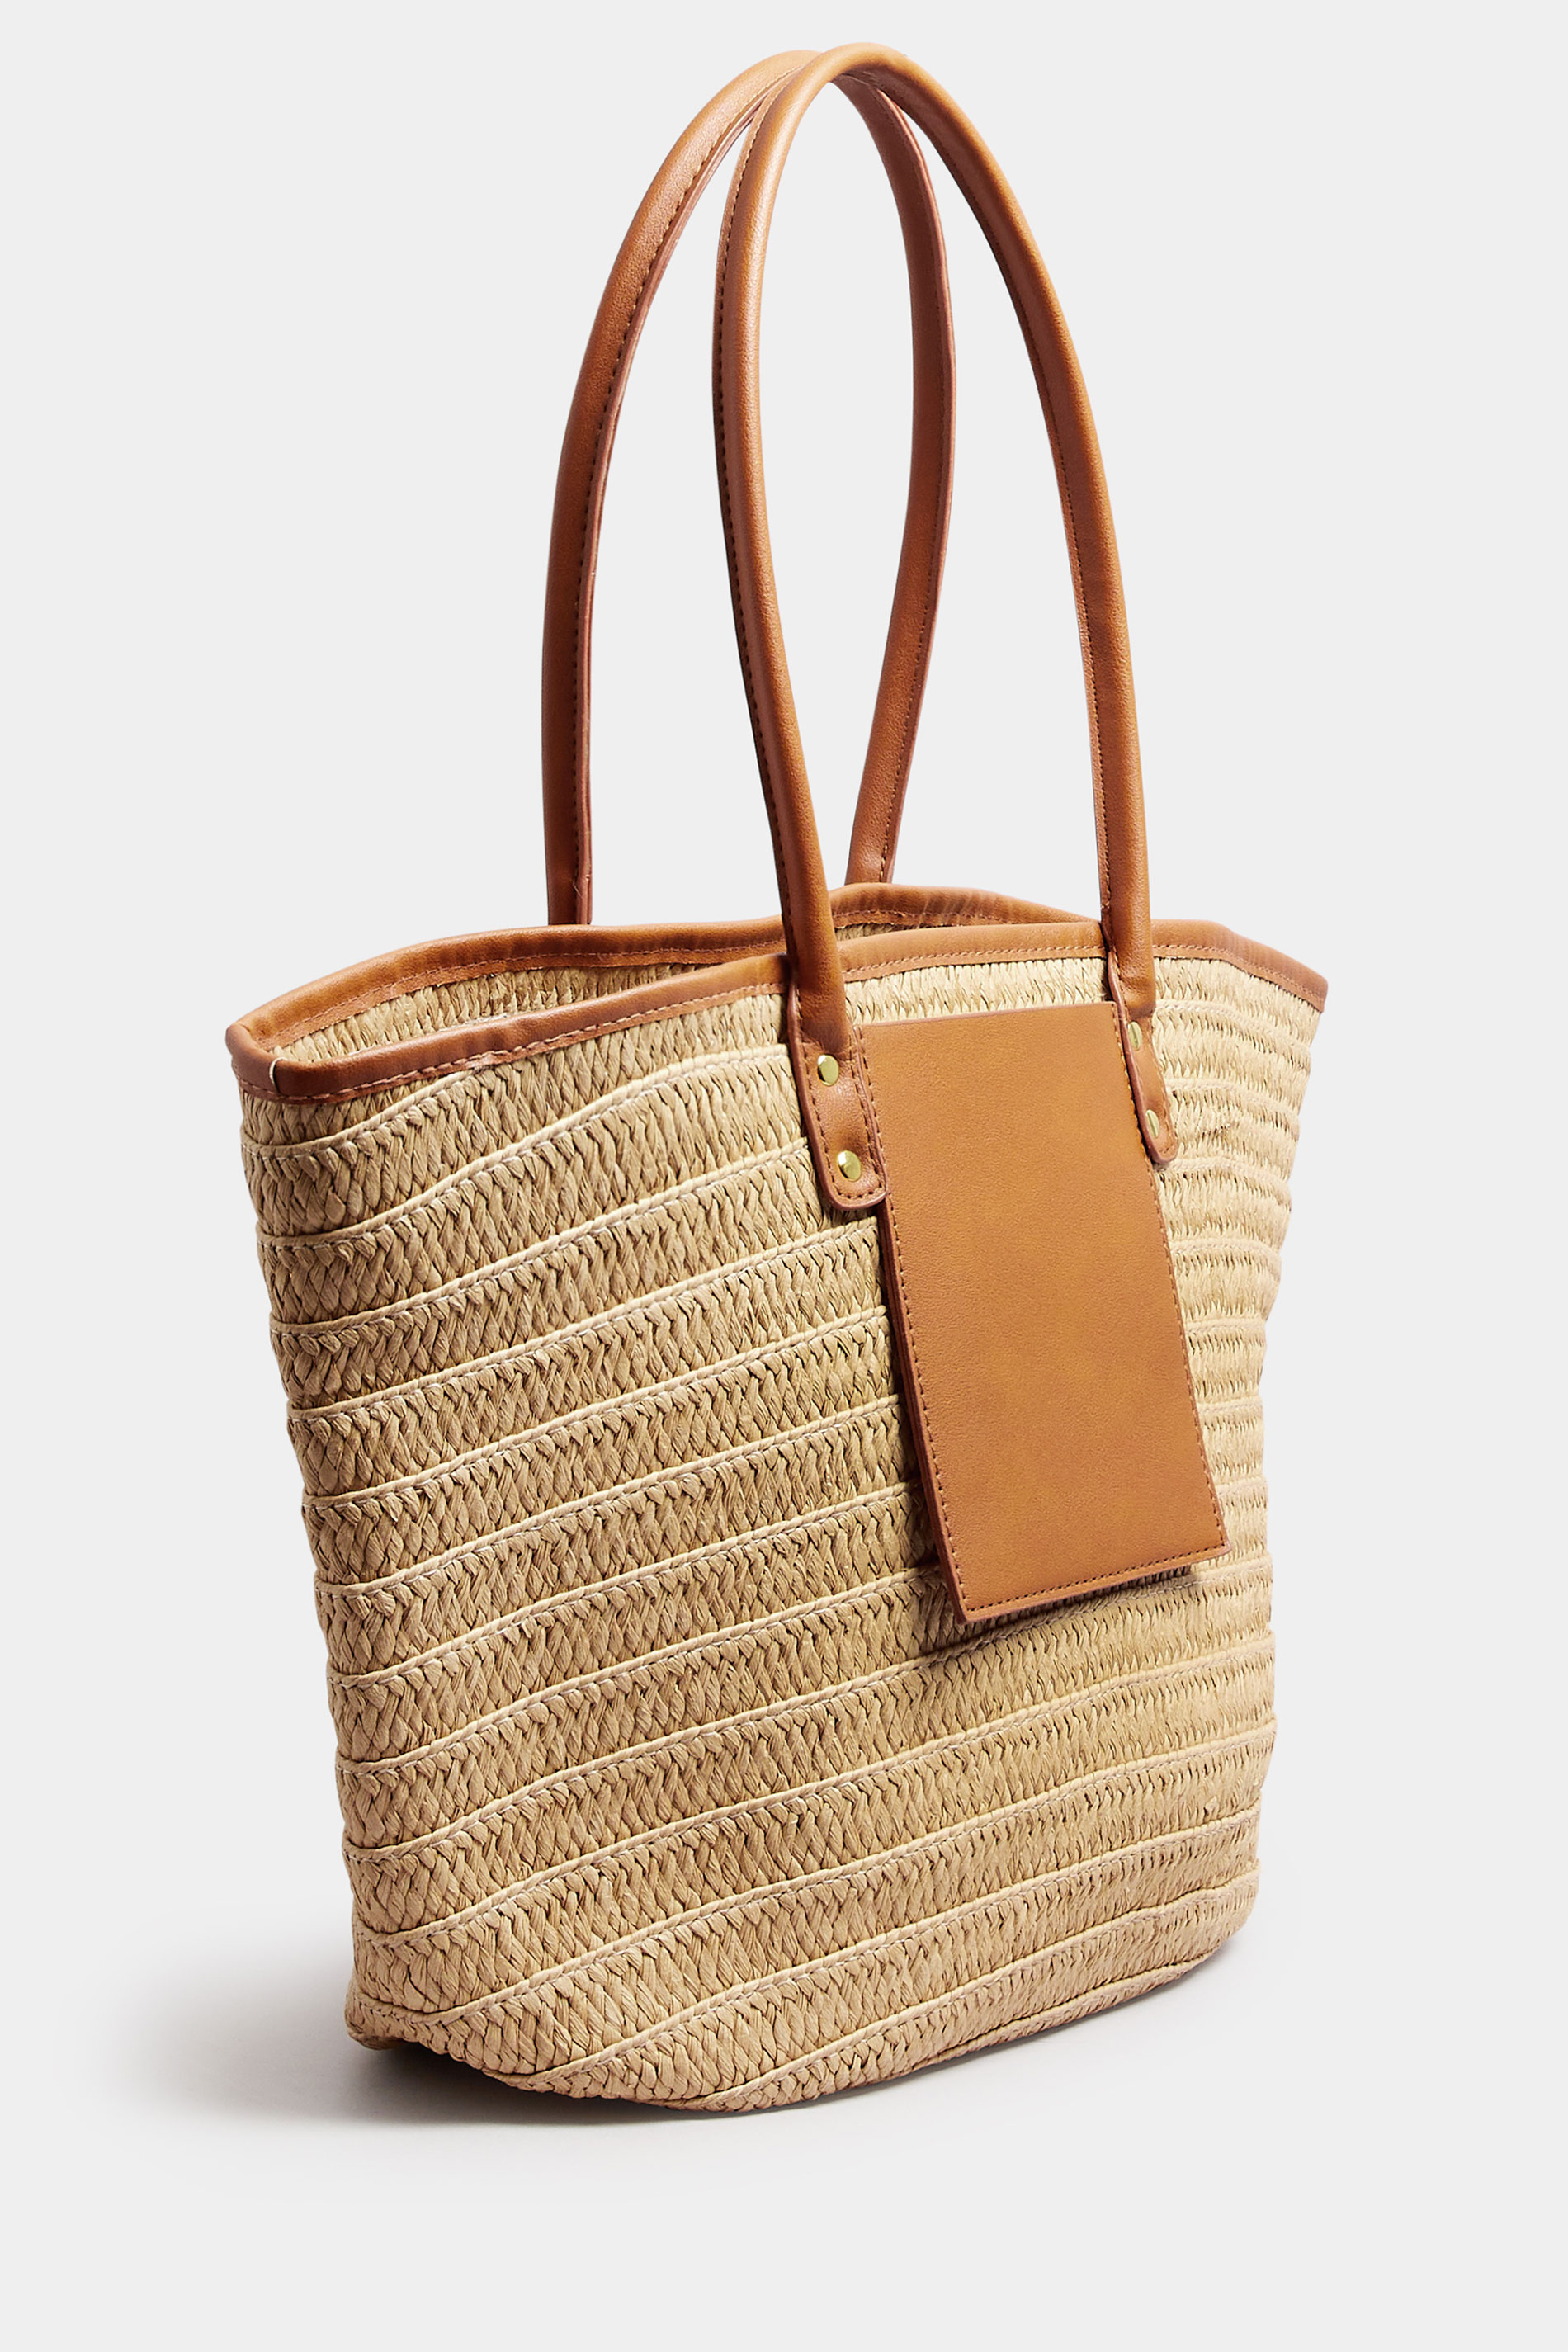 Tan Brown Straw Beach Bag | Yours Clothing 3